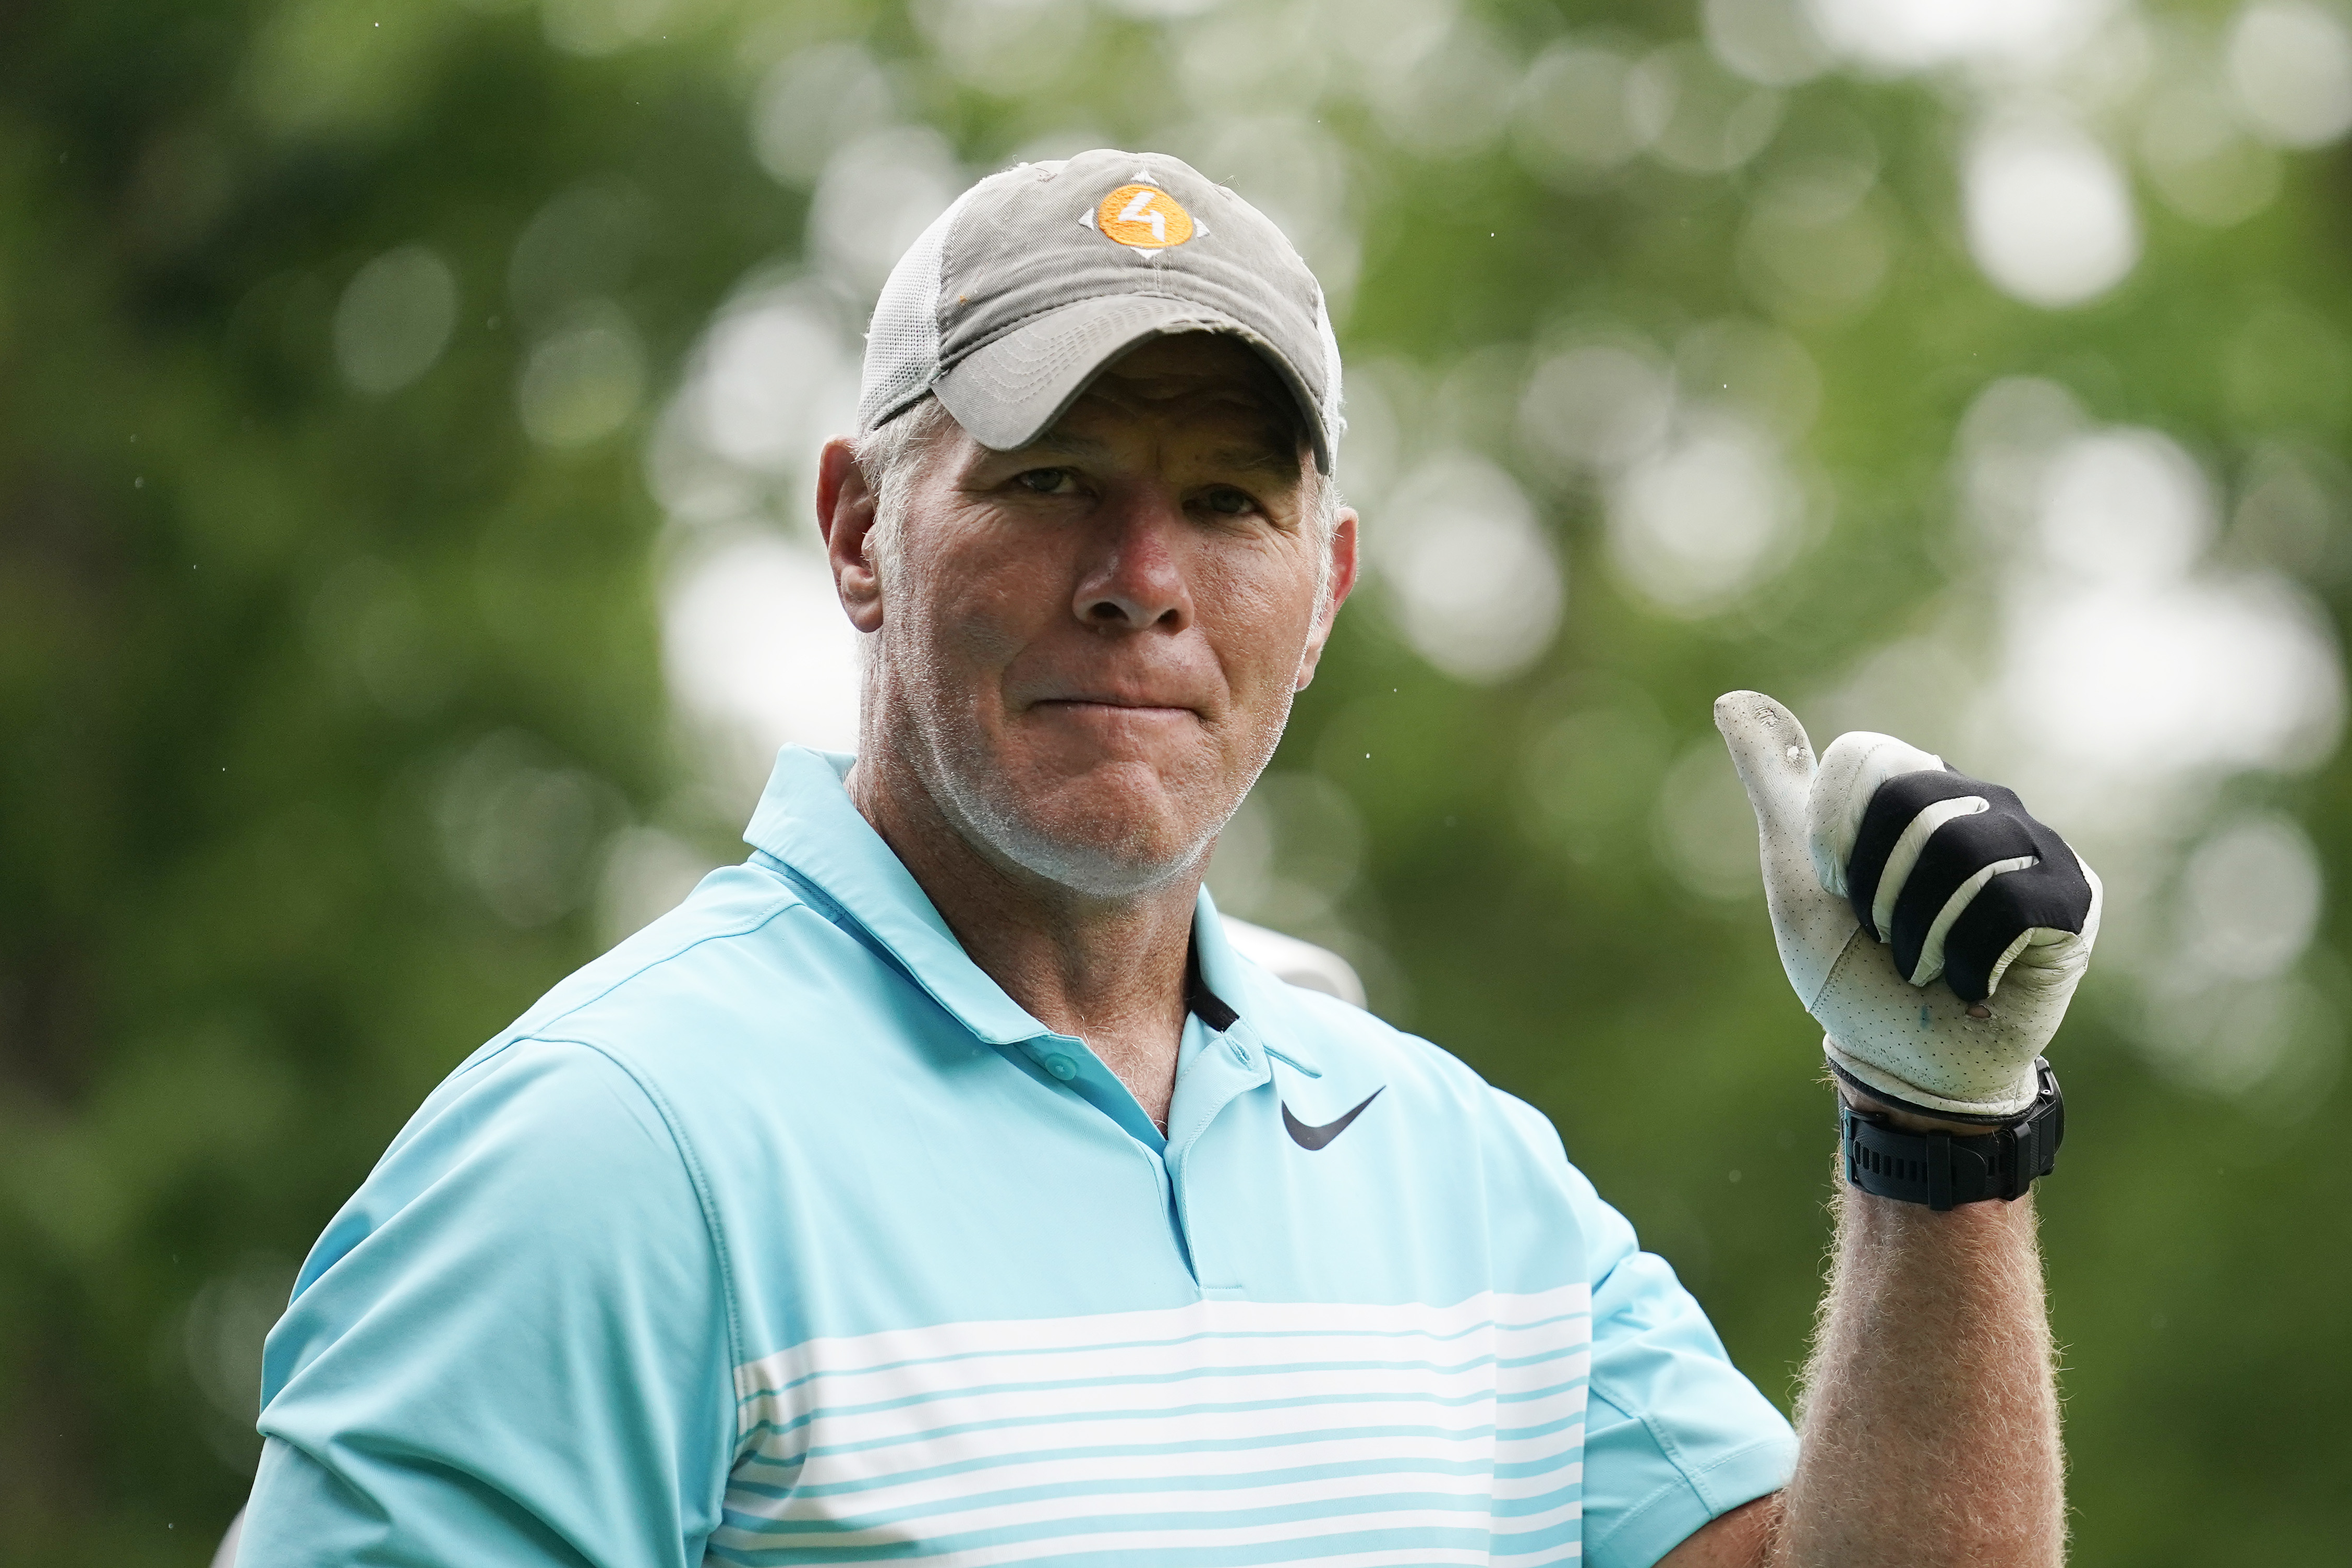 Brett Favre Claims He’s Suffered “Thousands” Of Concussions